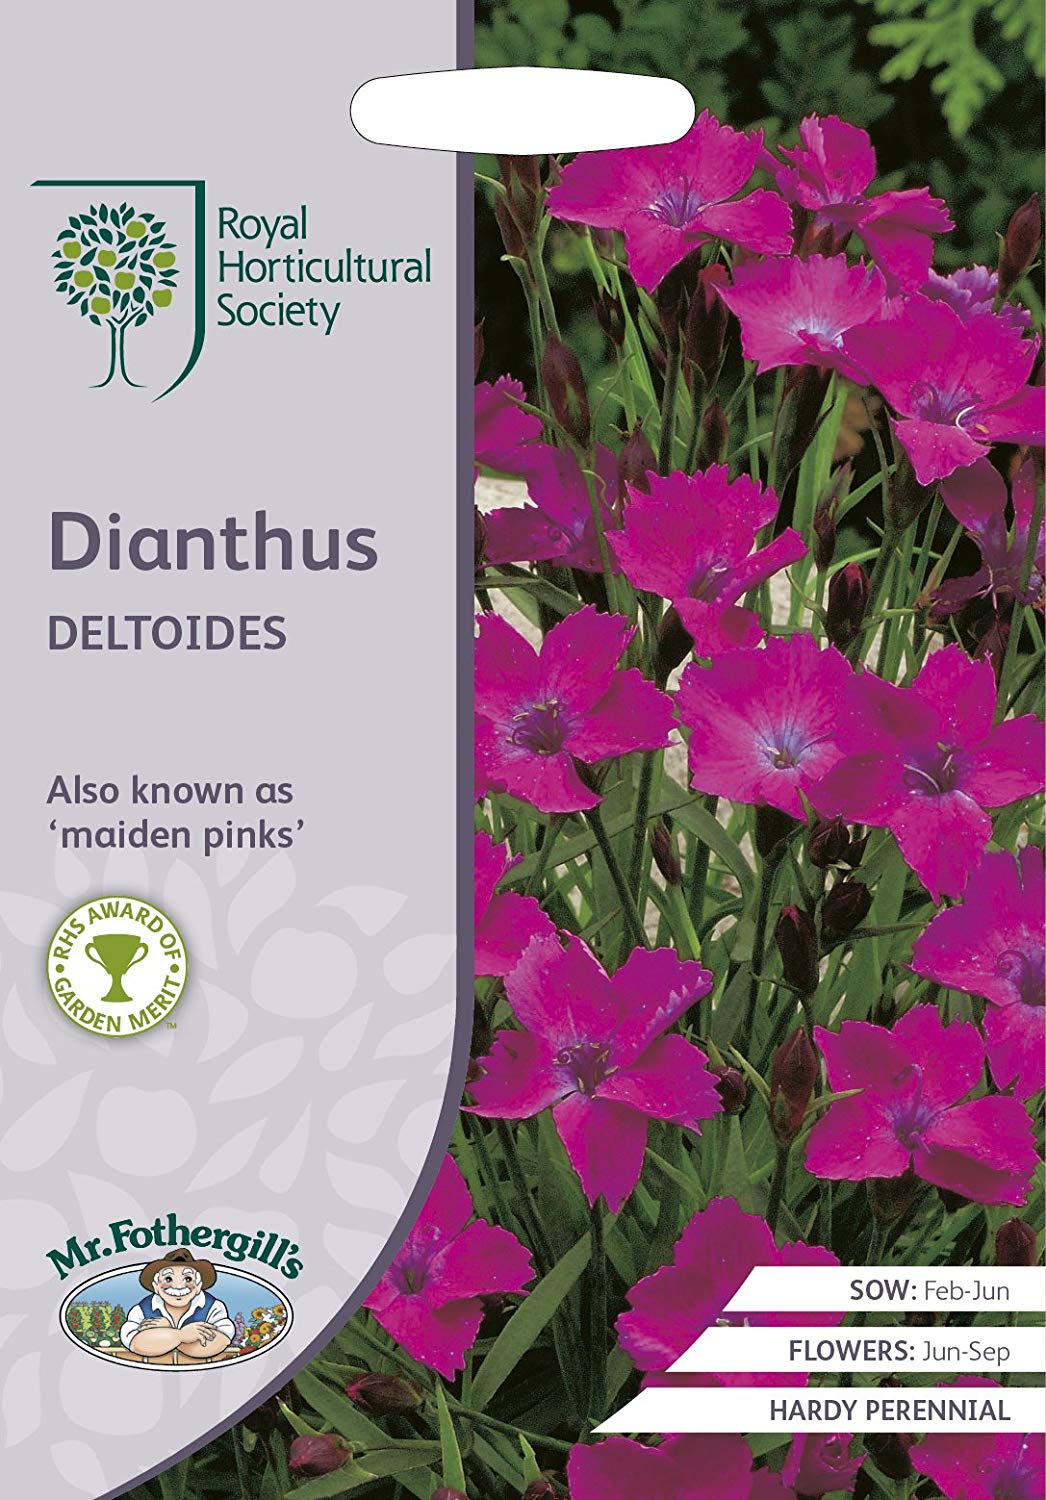 Mr.Fothergill's Seeds Royal Horticultural Society Dianthus DELTOIDES ダイアンサス デルトイデス ミスター・フォザーギルズシード